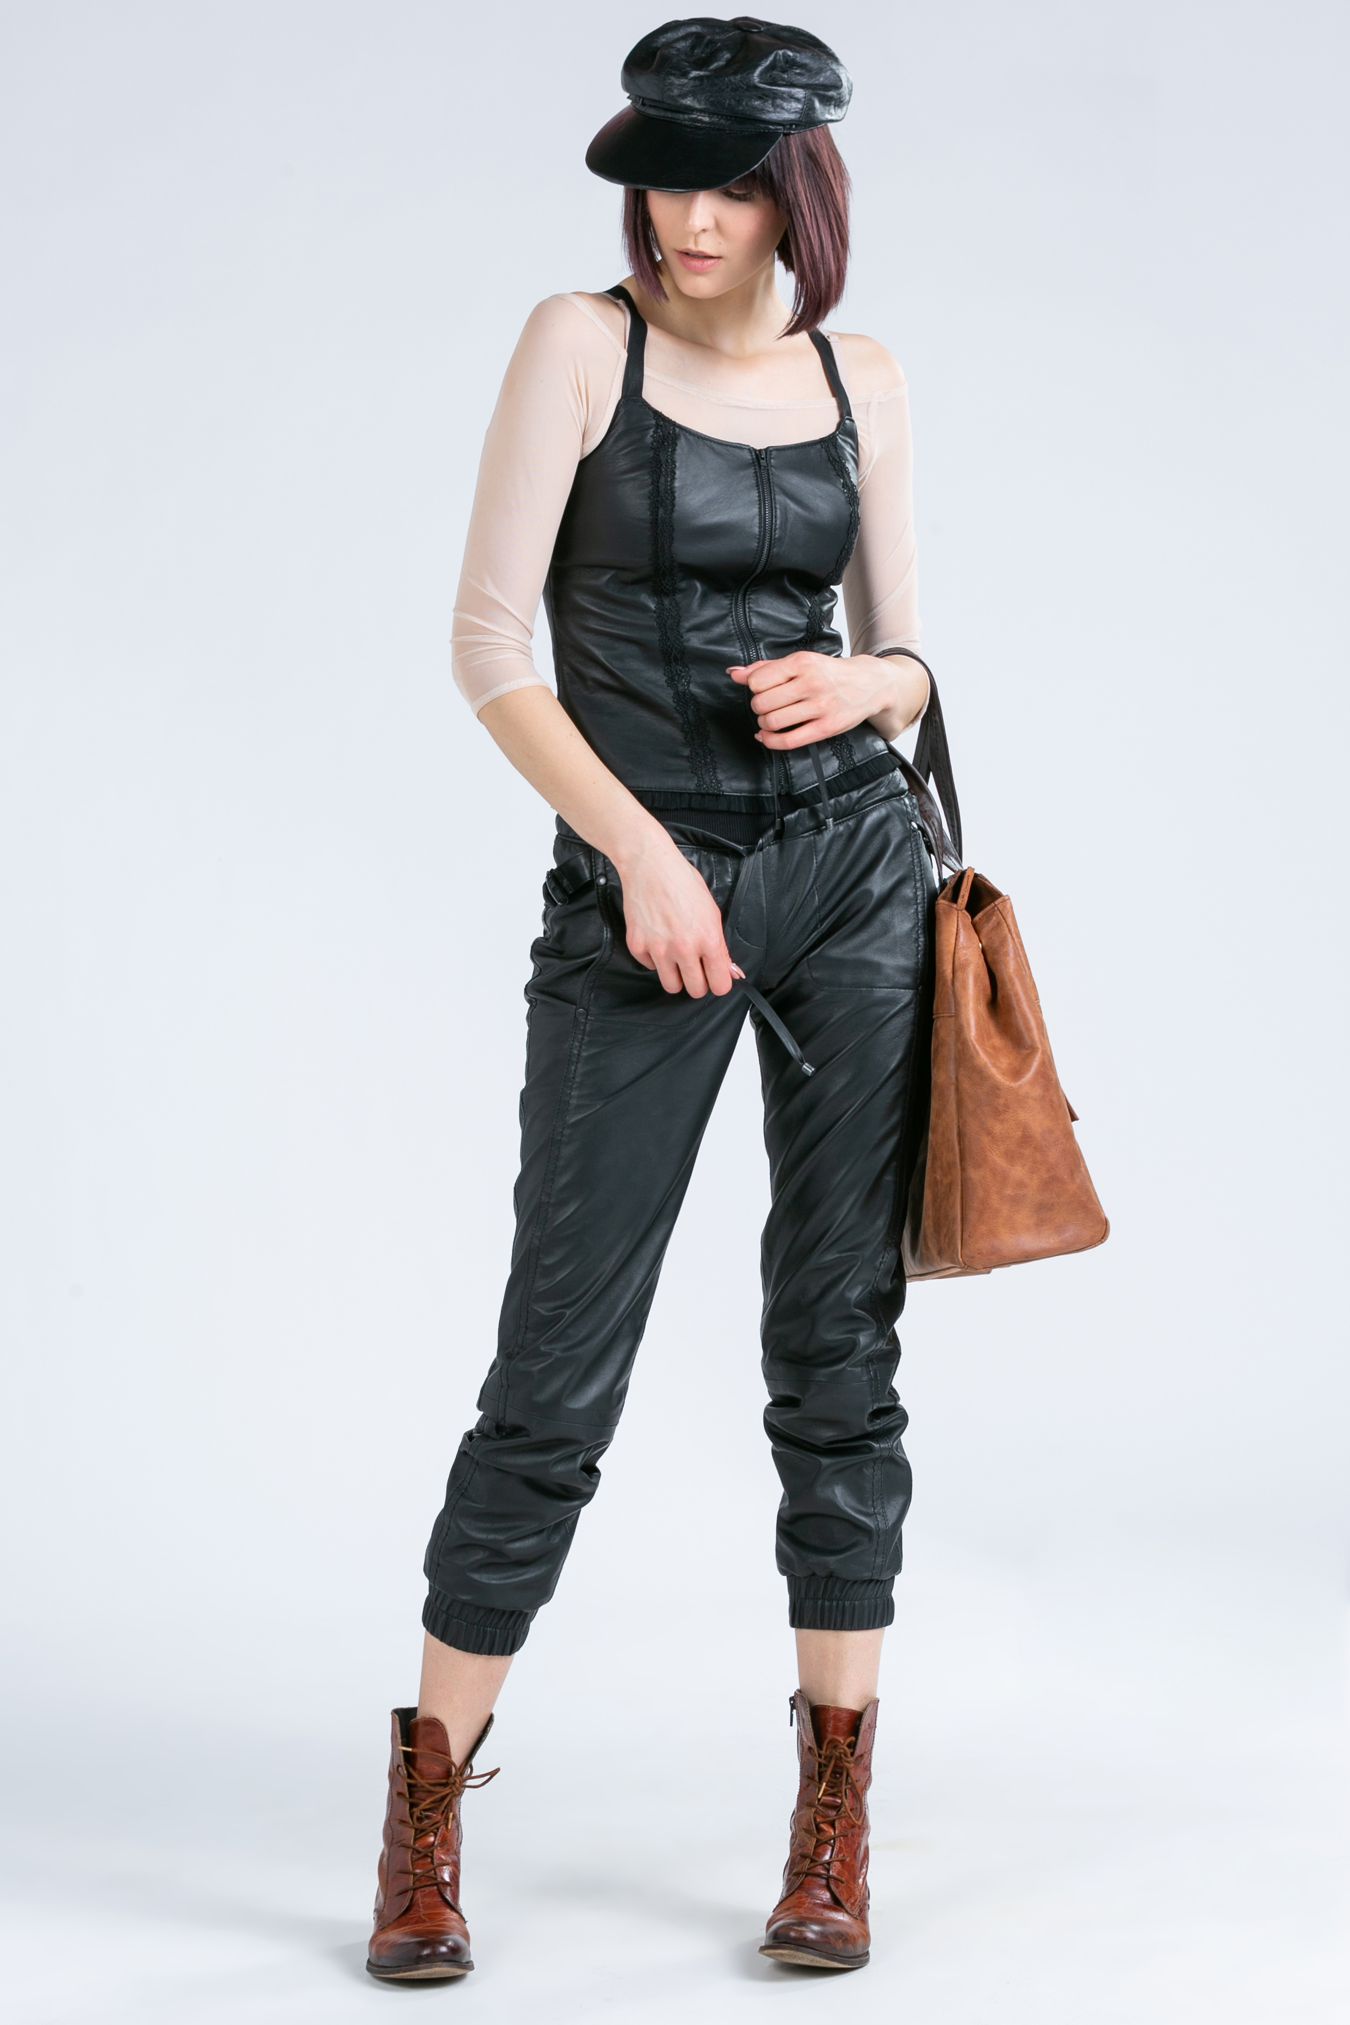 120015 LEATHER PANTS WITH STRAPS BLACK - By Rieske image 1